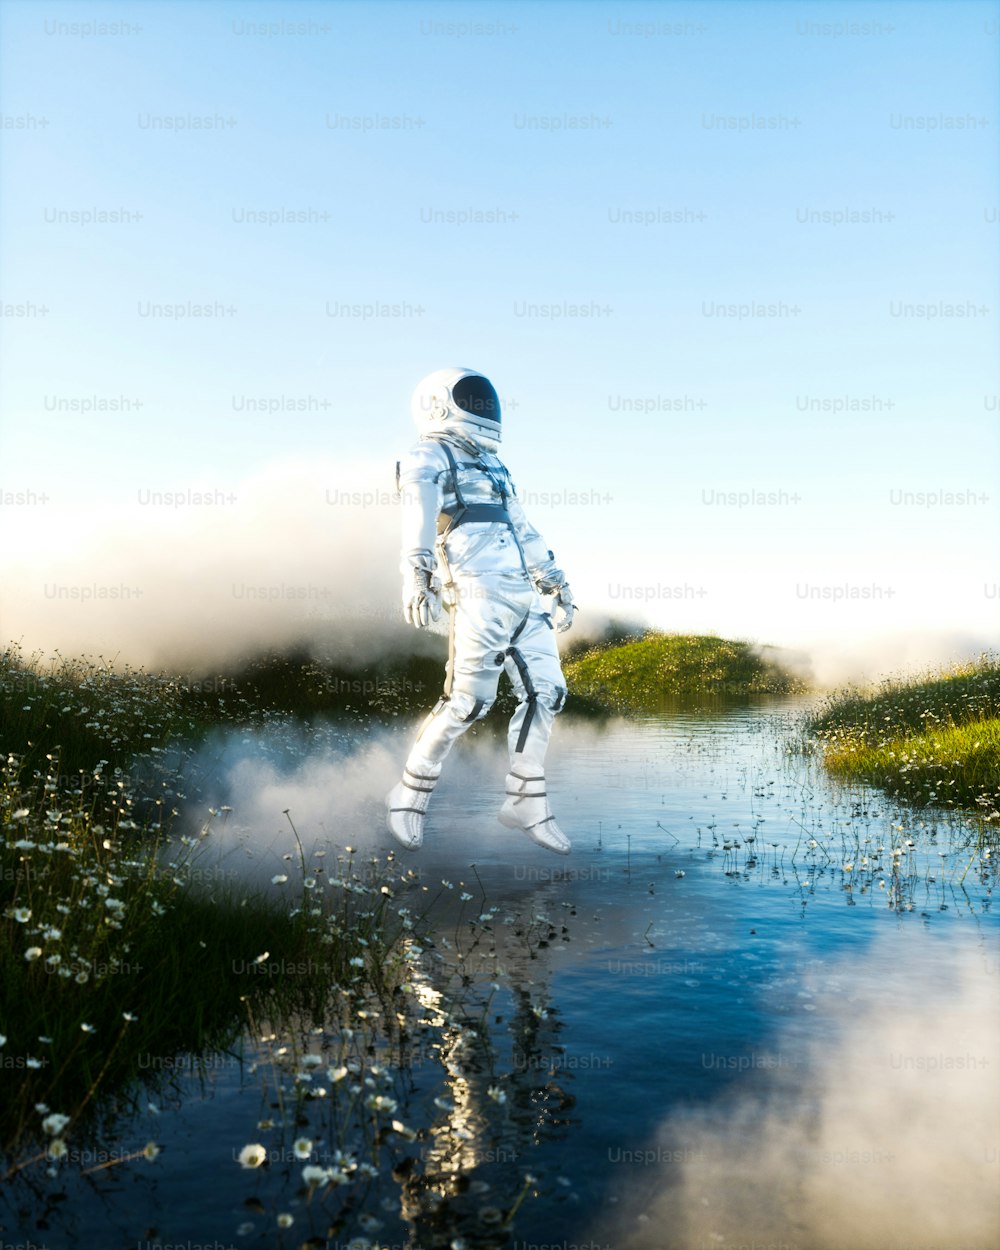 a person in a space suit standing in a puddle of water